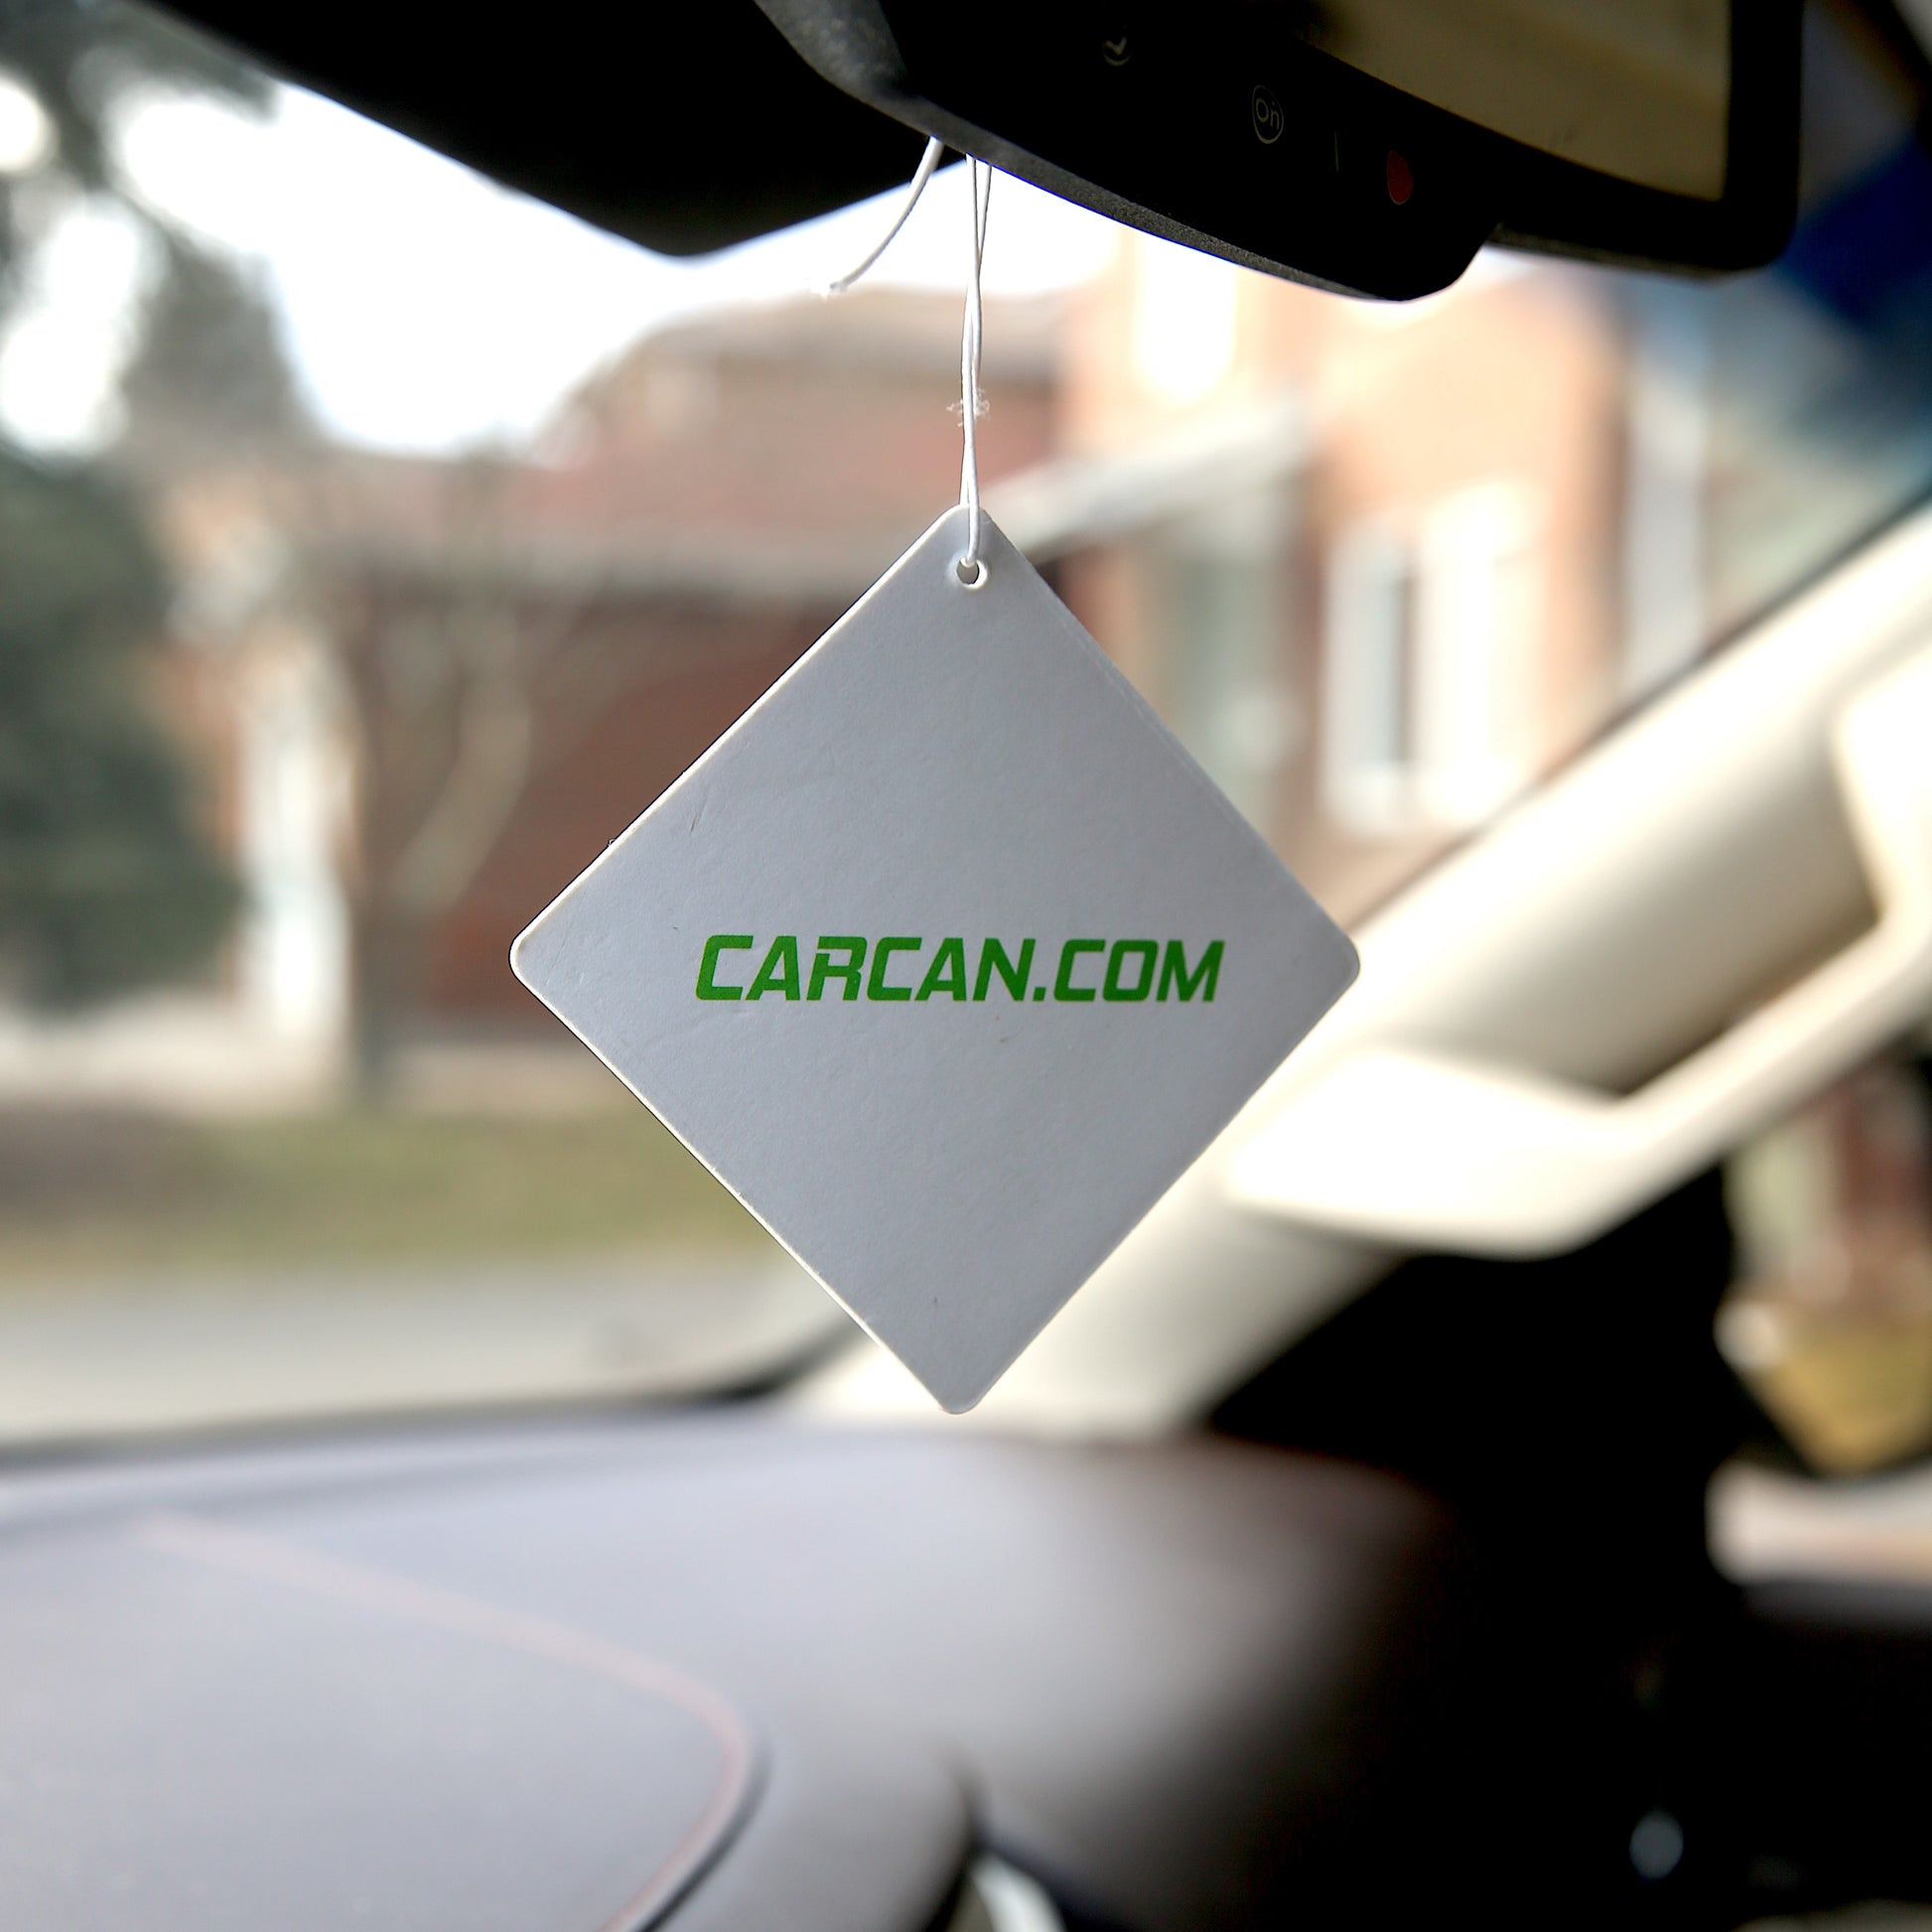 The Best Airfreshener for your car